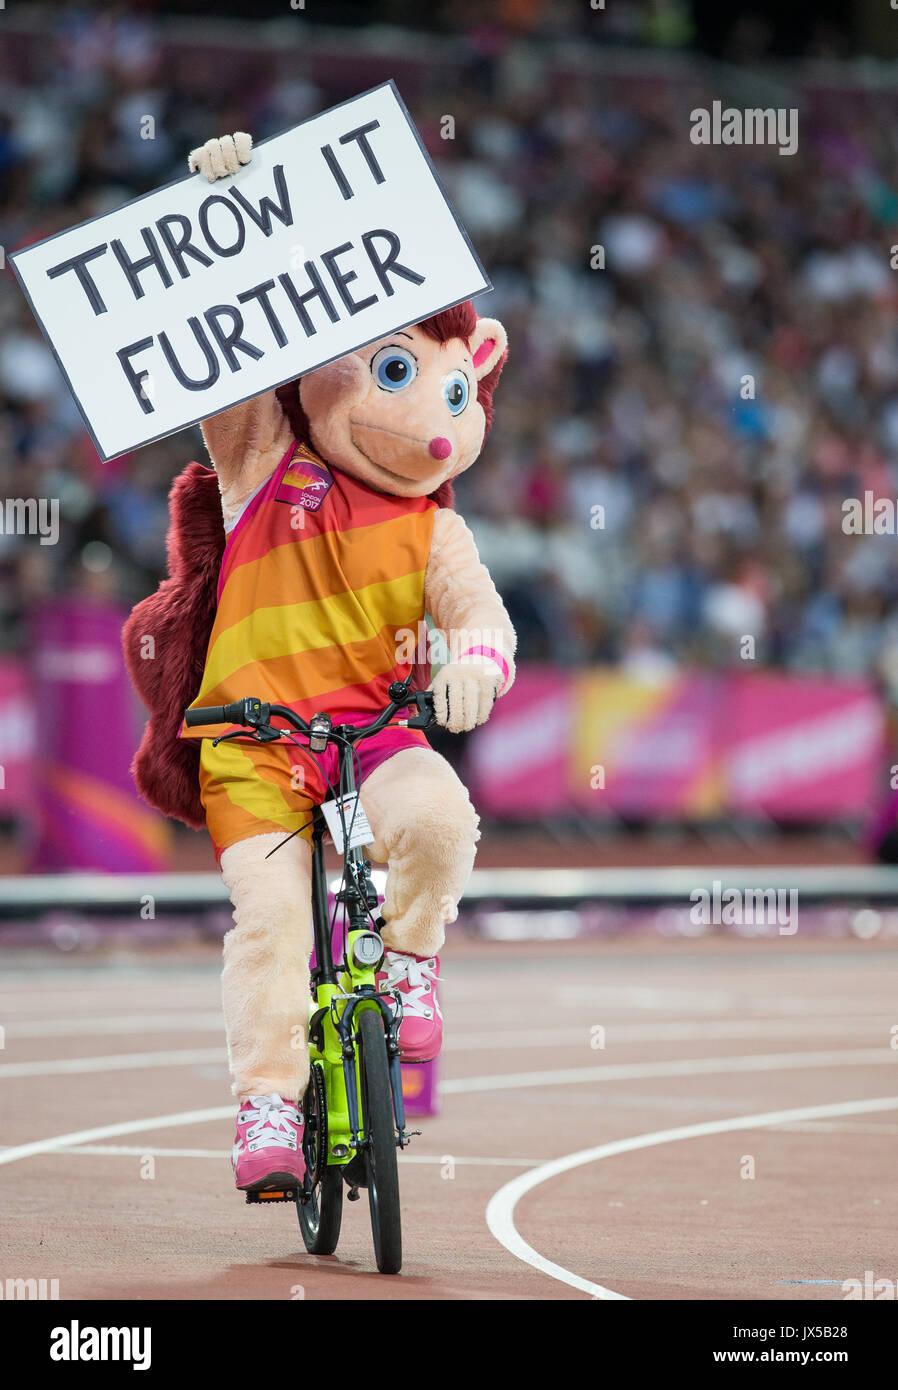 HERO the Hedgehog mascot rides around on a bike as the Women's Discus Final is going on parading a sign 'THROW IT FURTHER'  during the Final Day of the IAAF World Athletics Championships (Day 10) at the Olympic Park, London, England on 13 August 2017. Photo by Andy Rowland / PRiME Media Images. Stock Photo